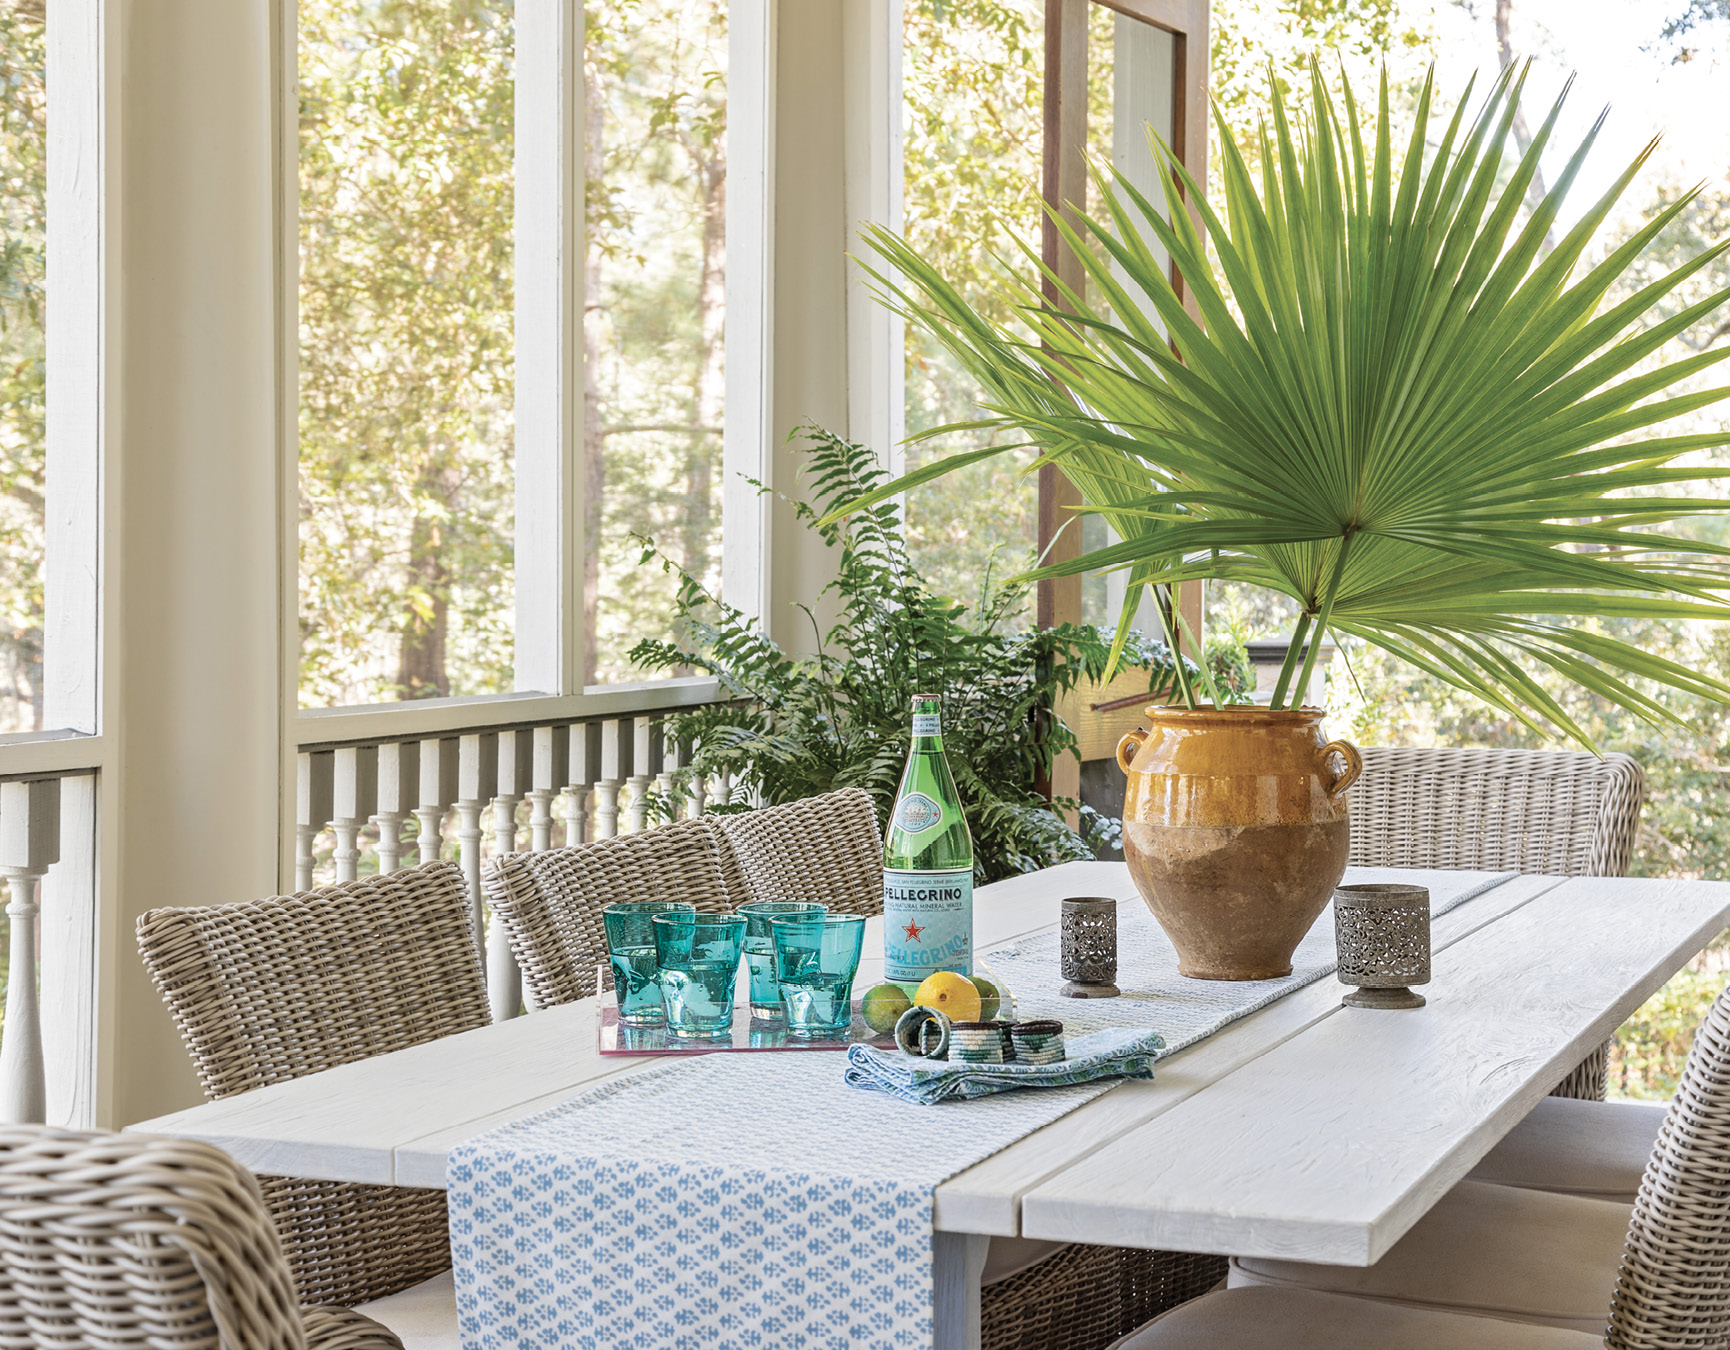 Outdoor Living: Part of the renovation focused on making use of underused spaces, and the 12-foot-deep porch off the main living room and kitchen area was a prime target. Elebash added outdoor furniture, including this Kingsley Bate dining table, and created the feel of a continuous space between the two rooms by integrating the color palette with green, blues, and whites.